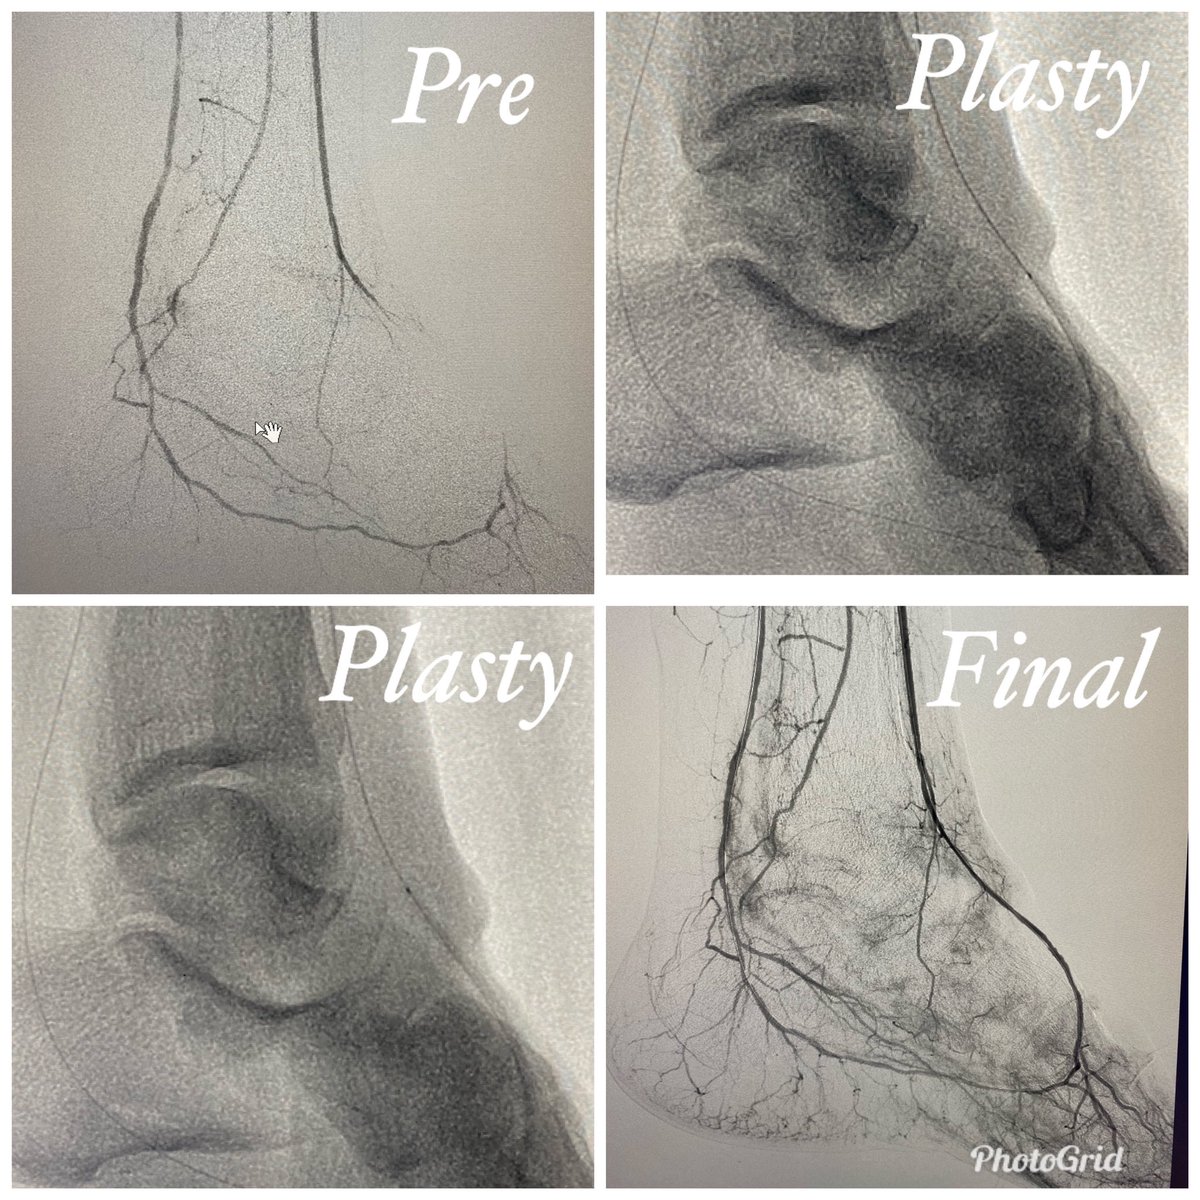 65 yo DM with no healing ulcer at toe amputation stump and #CLI treated by plantar arch reconstruction #pedalplantarloop. Good blush in foot post plasty. #CLIfighter @hospital_kims @ISVIRIndia @cirsesociety @SIRspecialists @SIRRFS